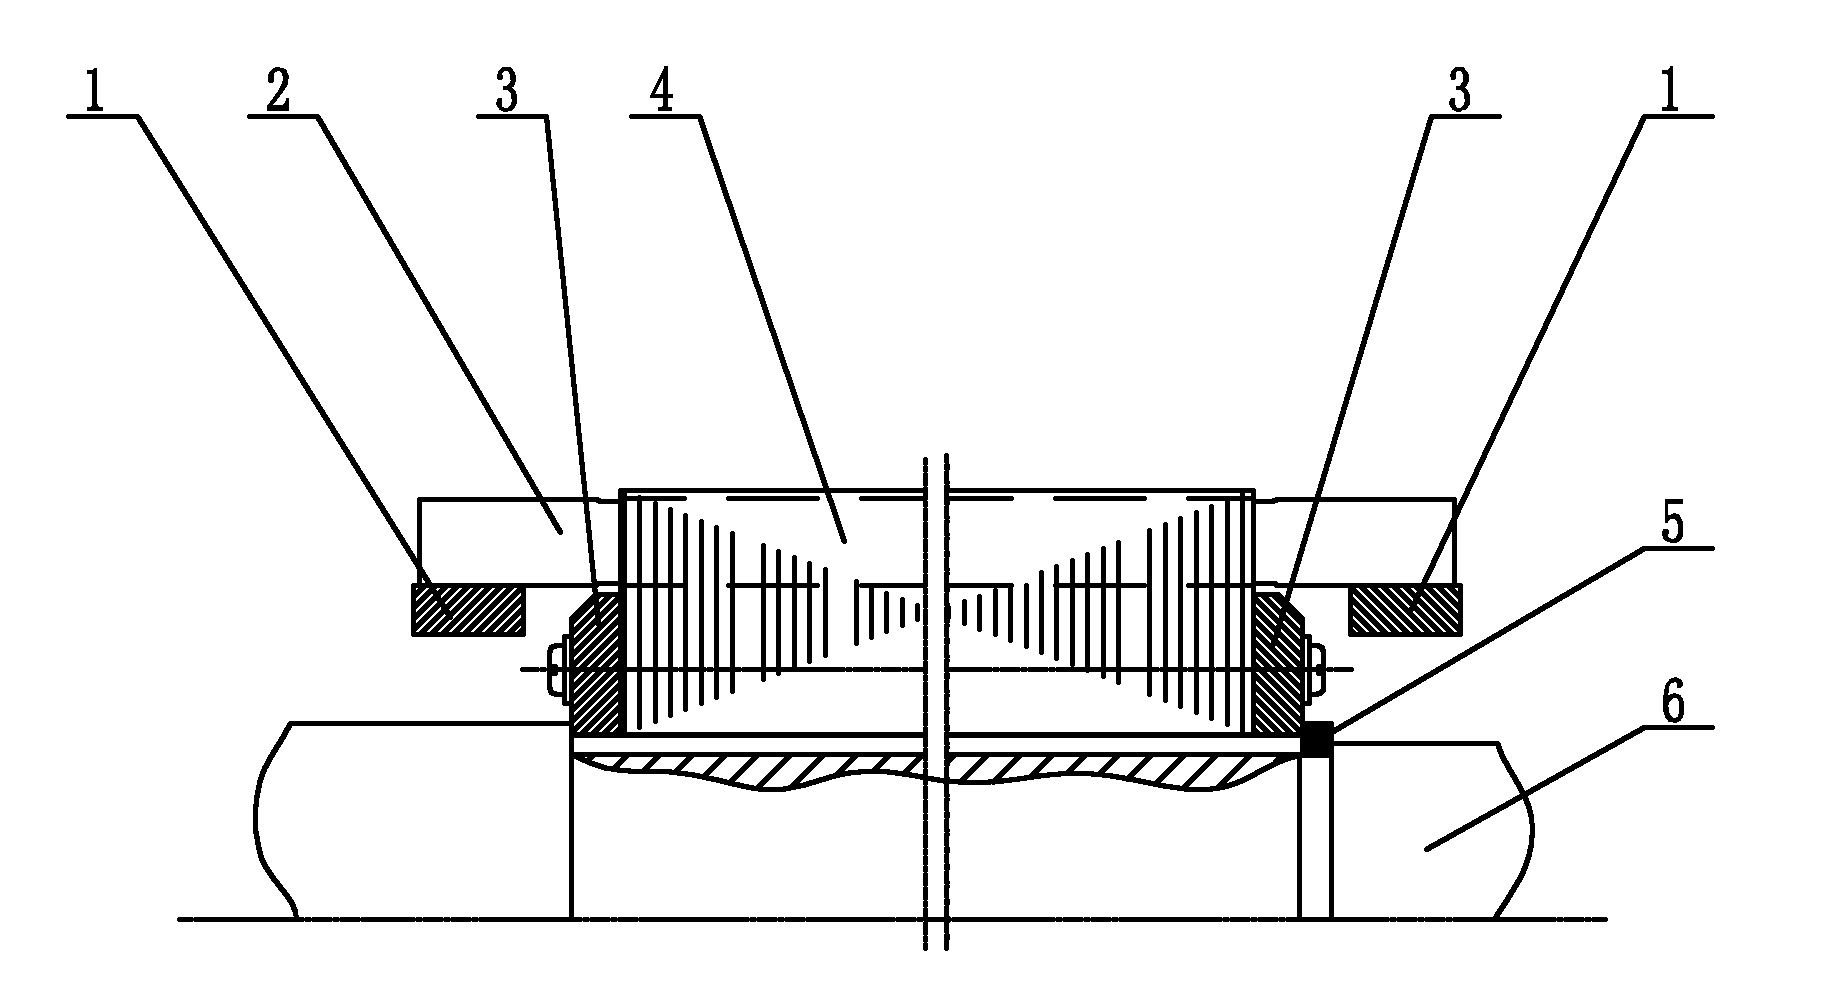 Rotor of alternating-current asynchronous motor